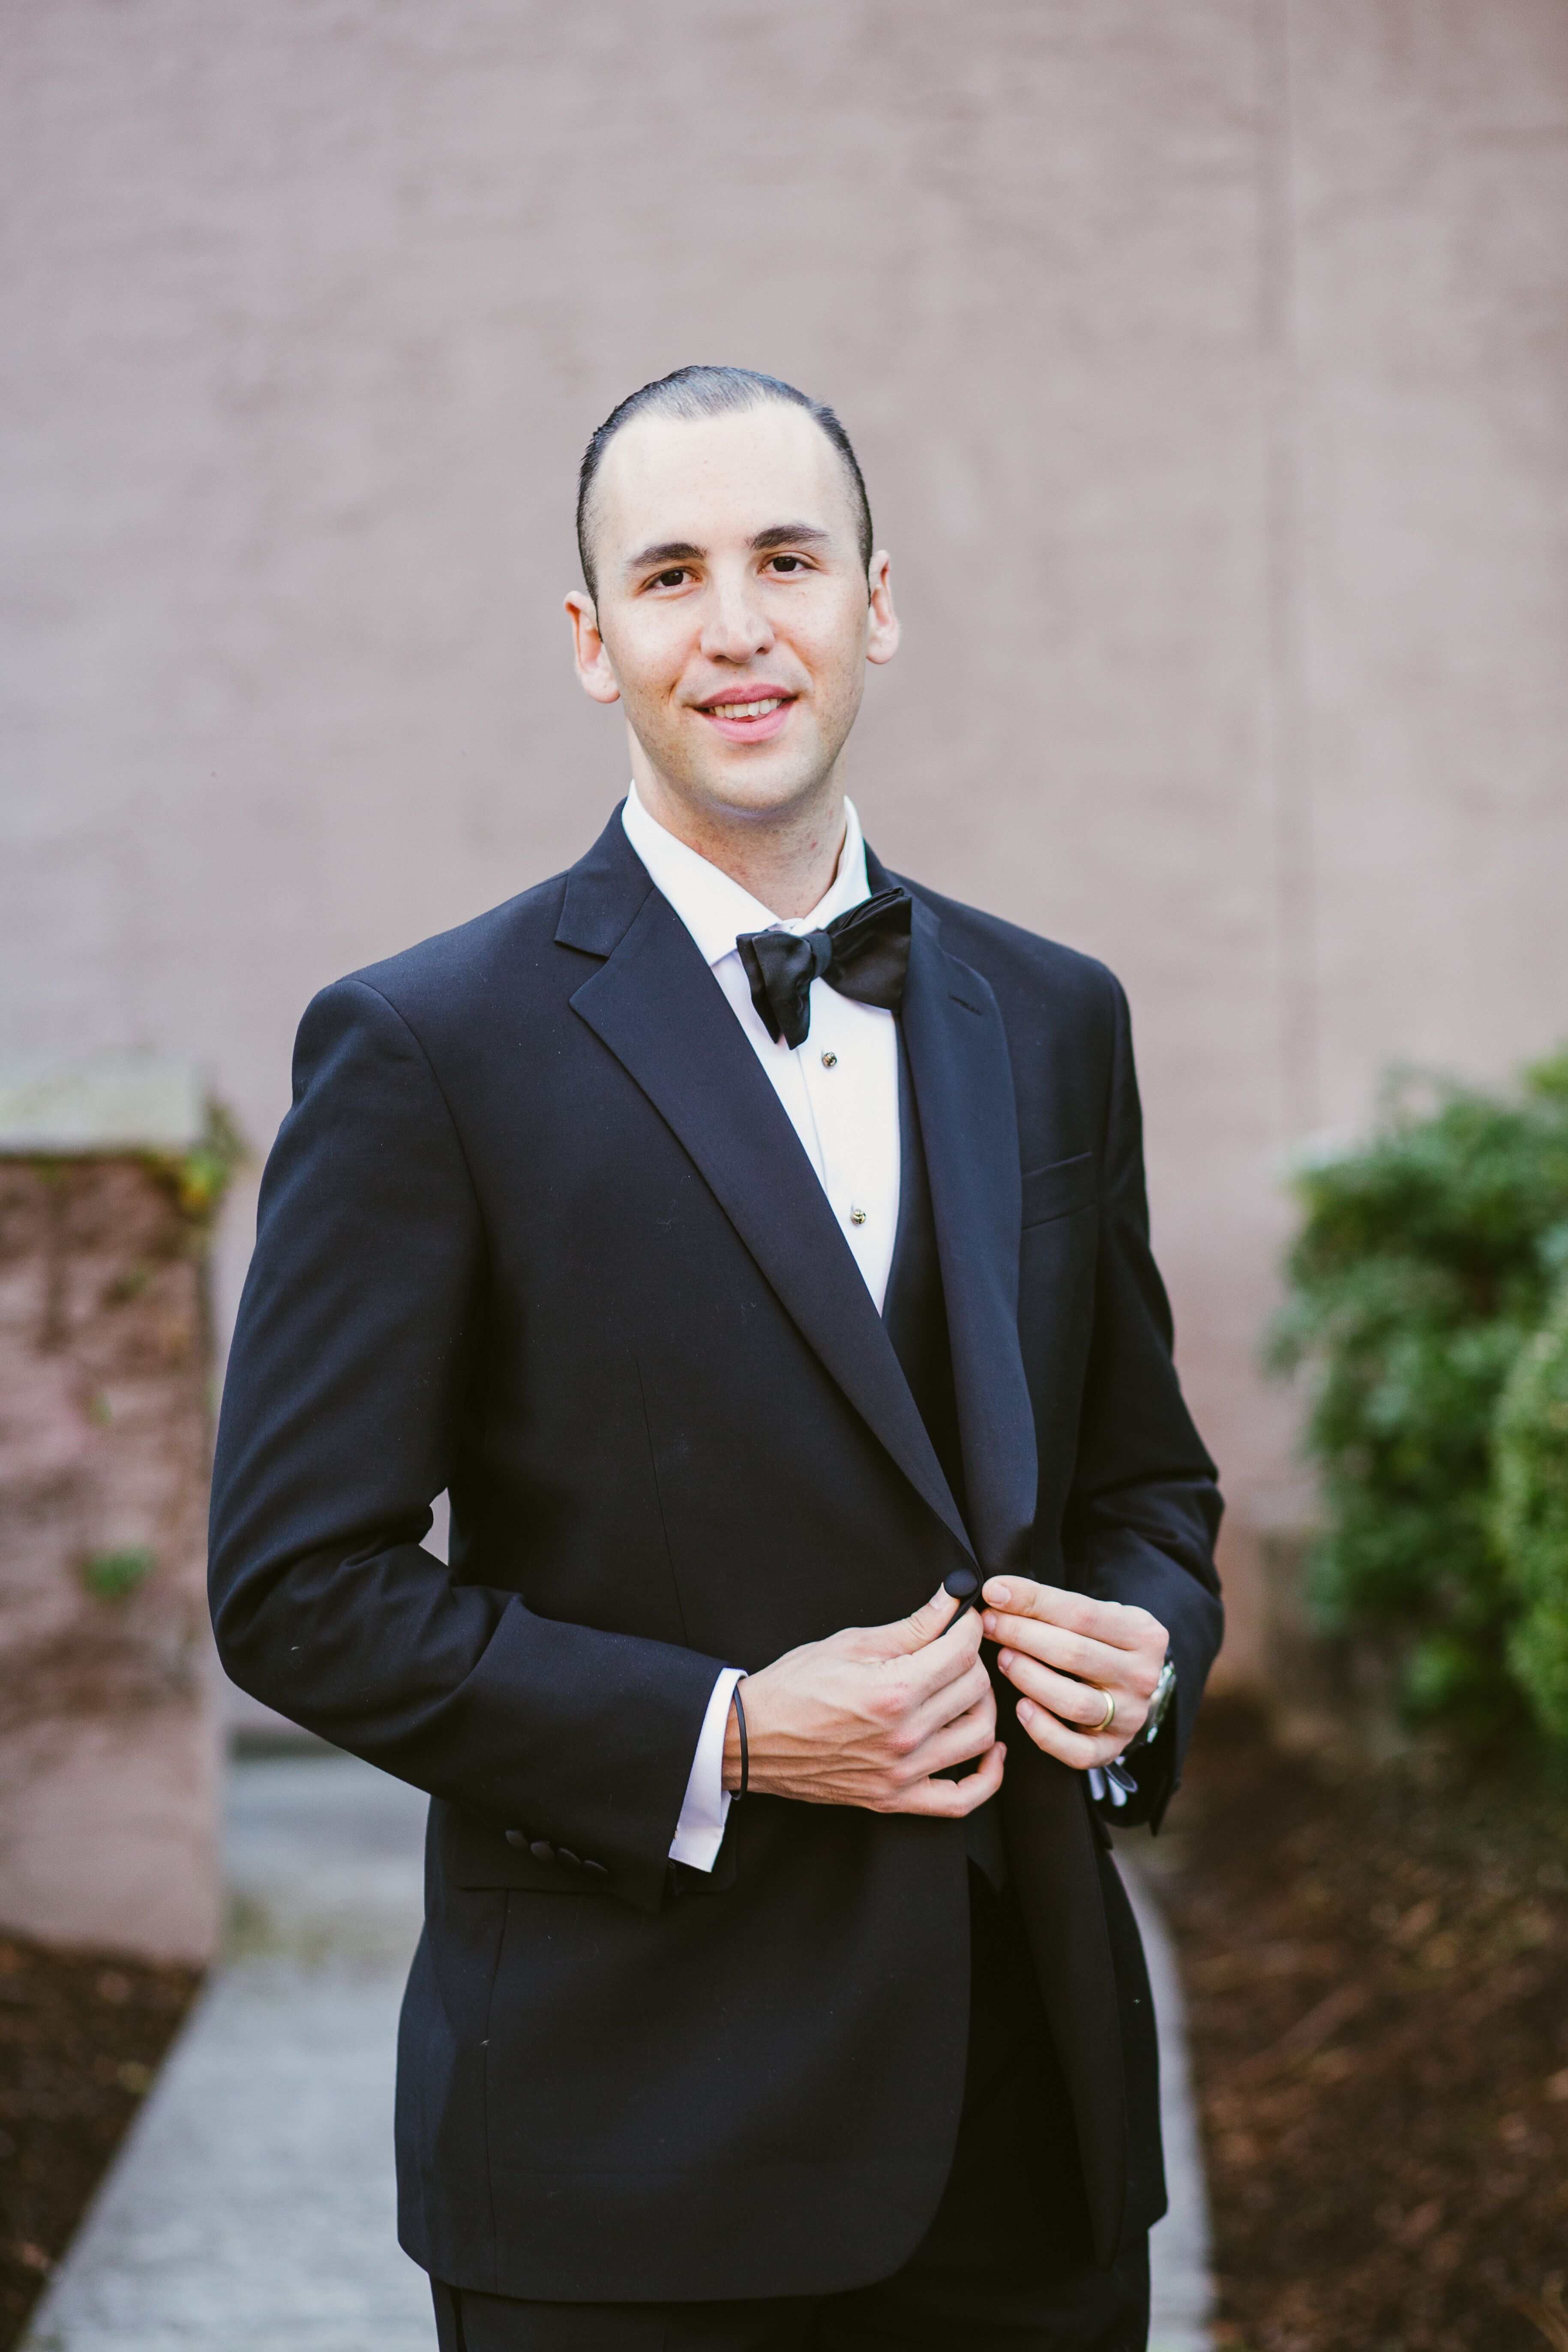 Groom Dressed in a Classic Black Tuxedo with Bowtie